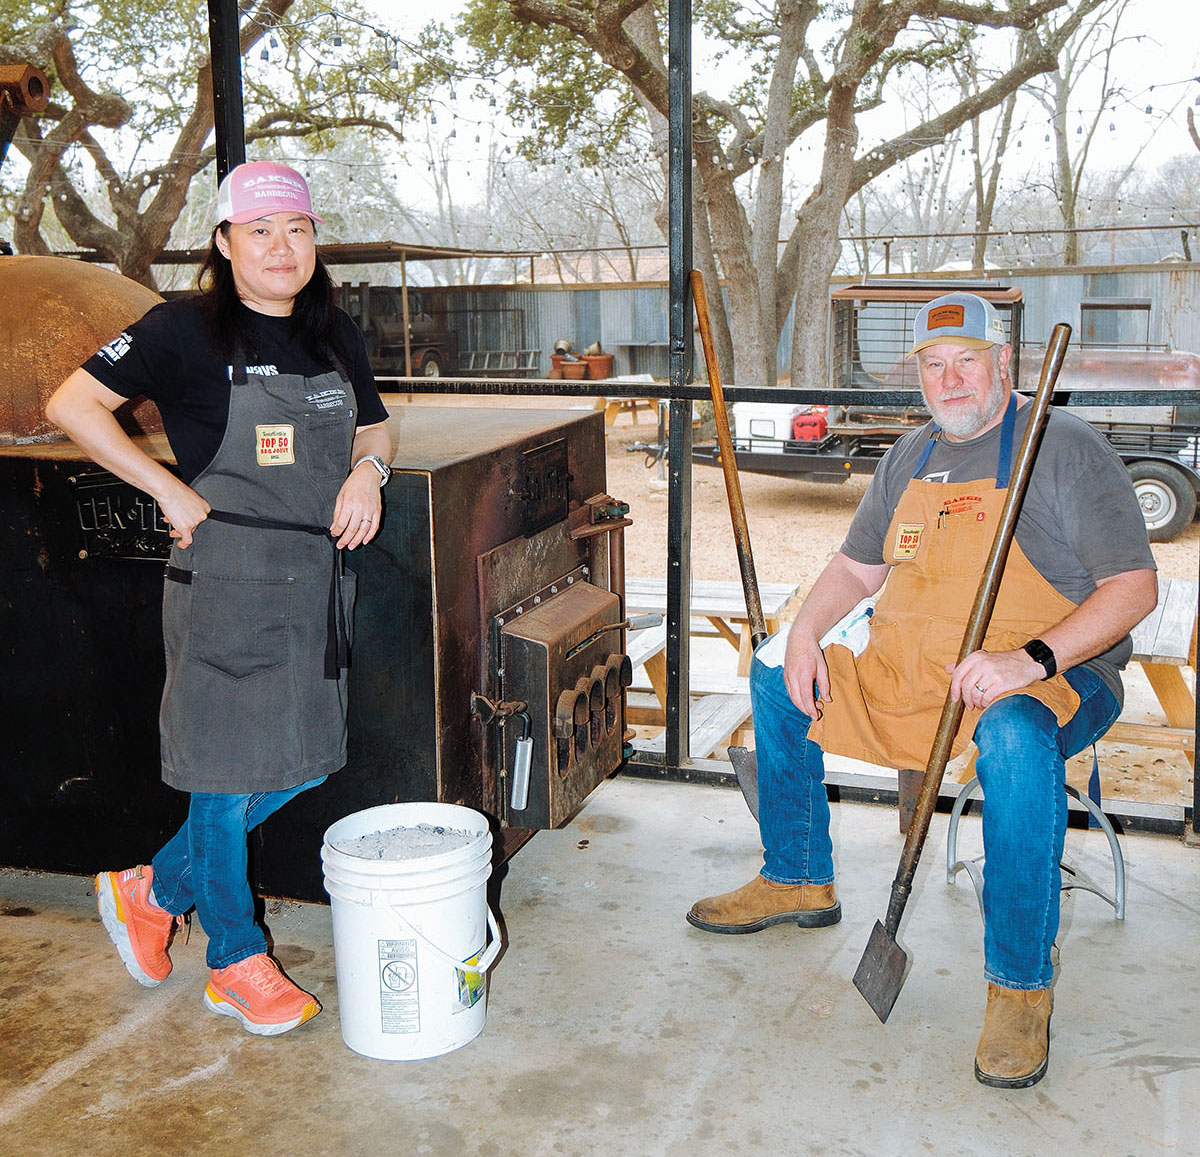 Two people stand next to a barbecue pit smoker